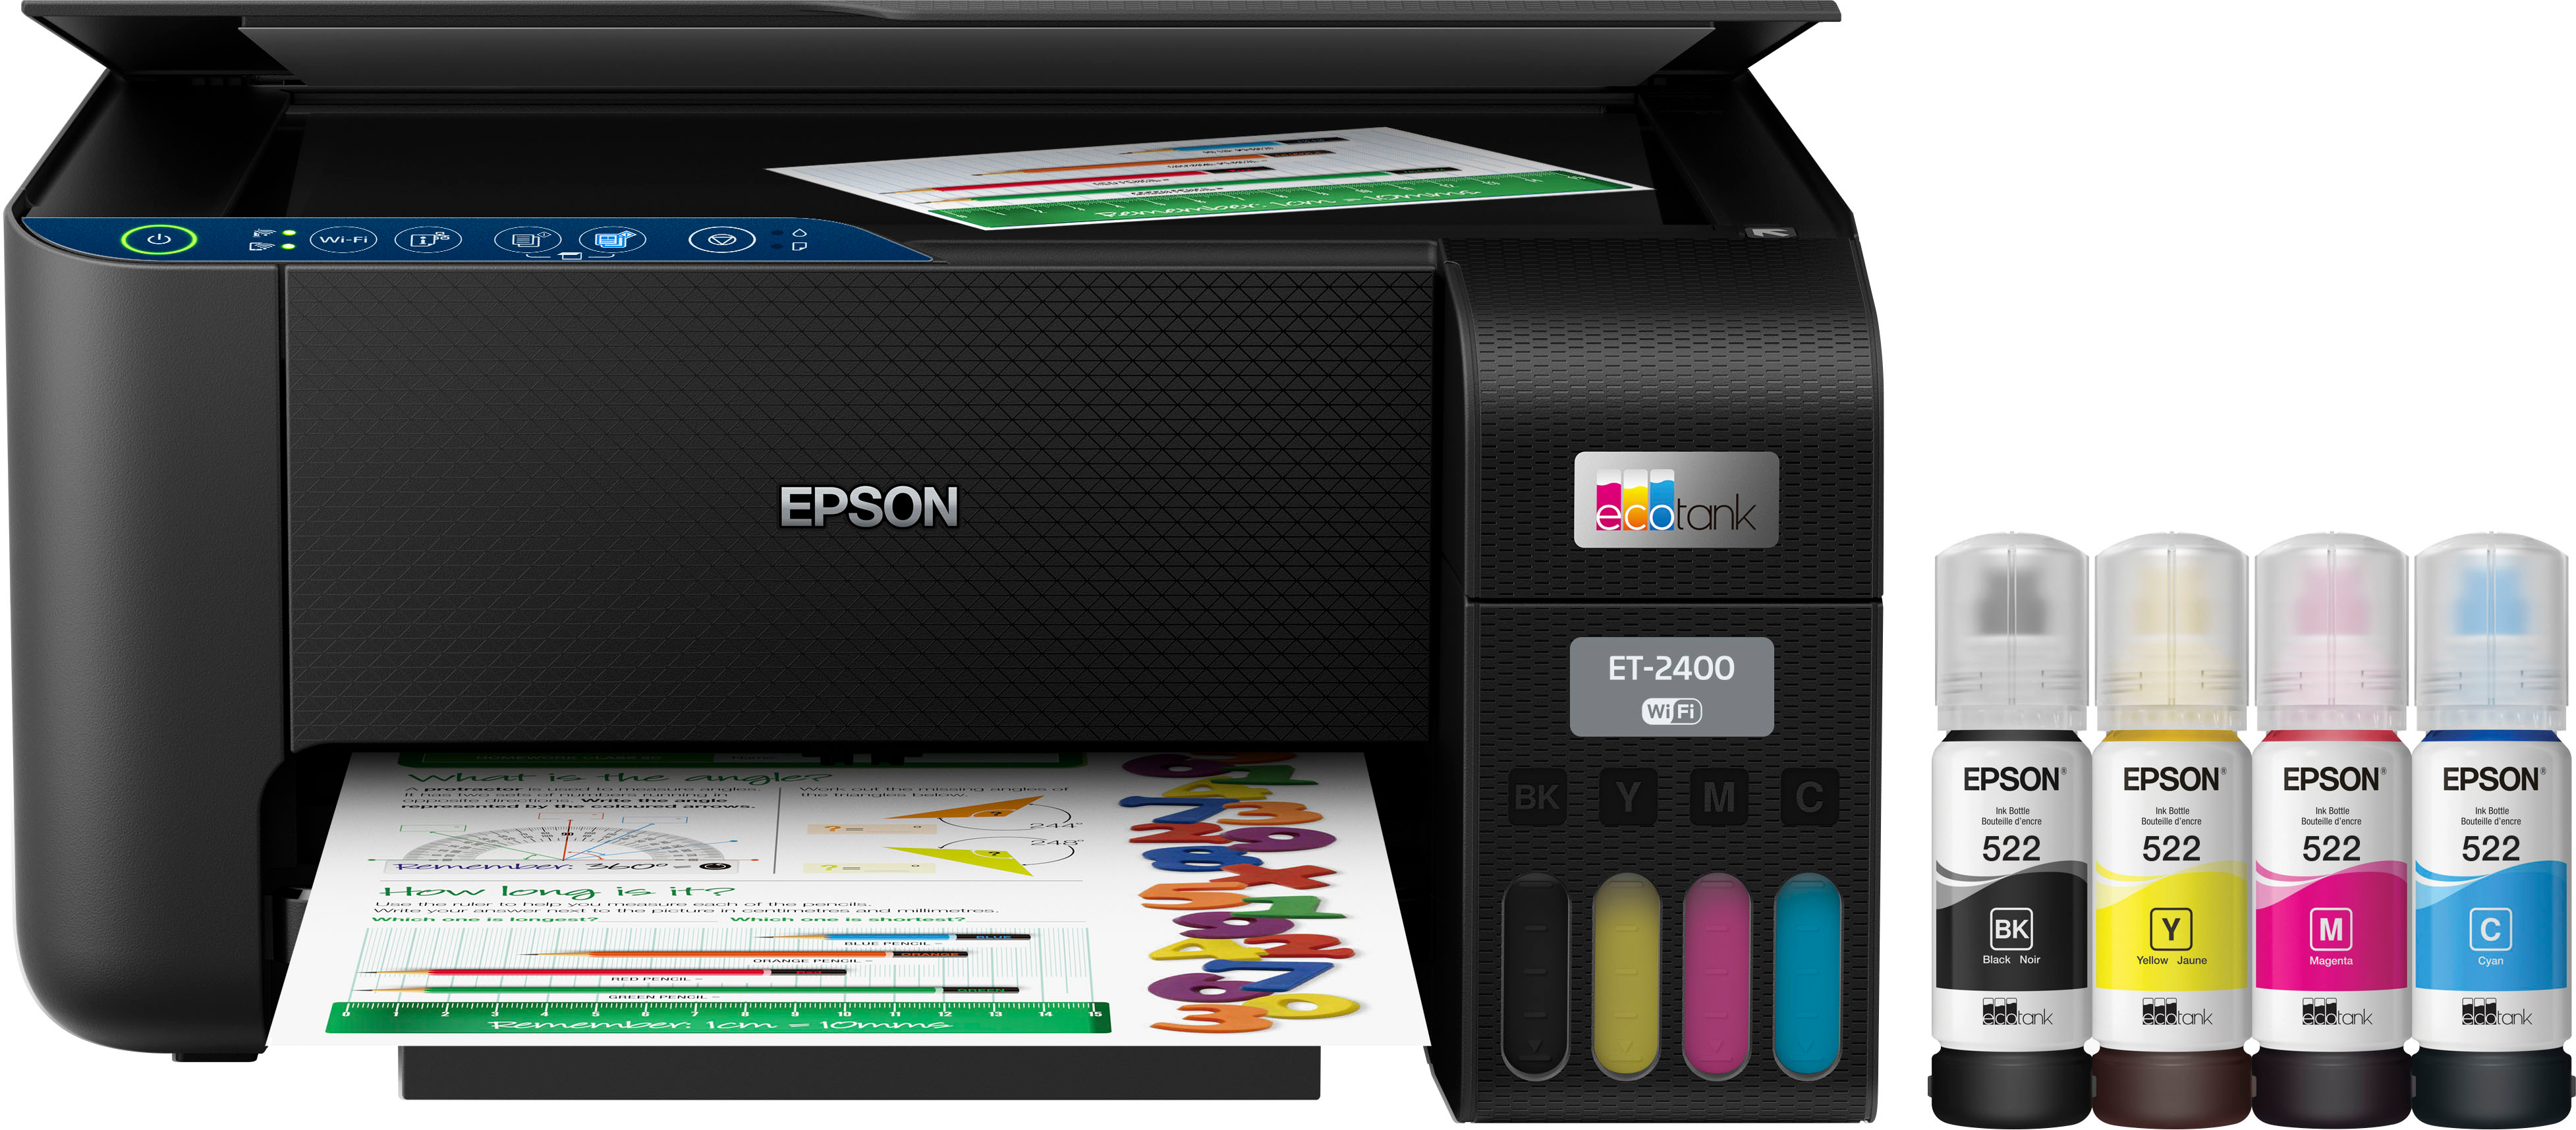 epson expression photo xp-8600 small-in-one inkjet printer - Best Buy